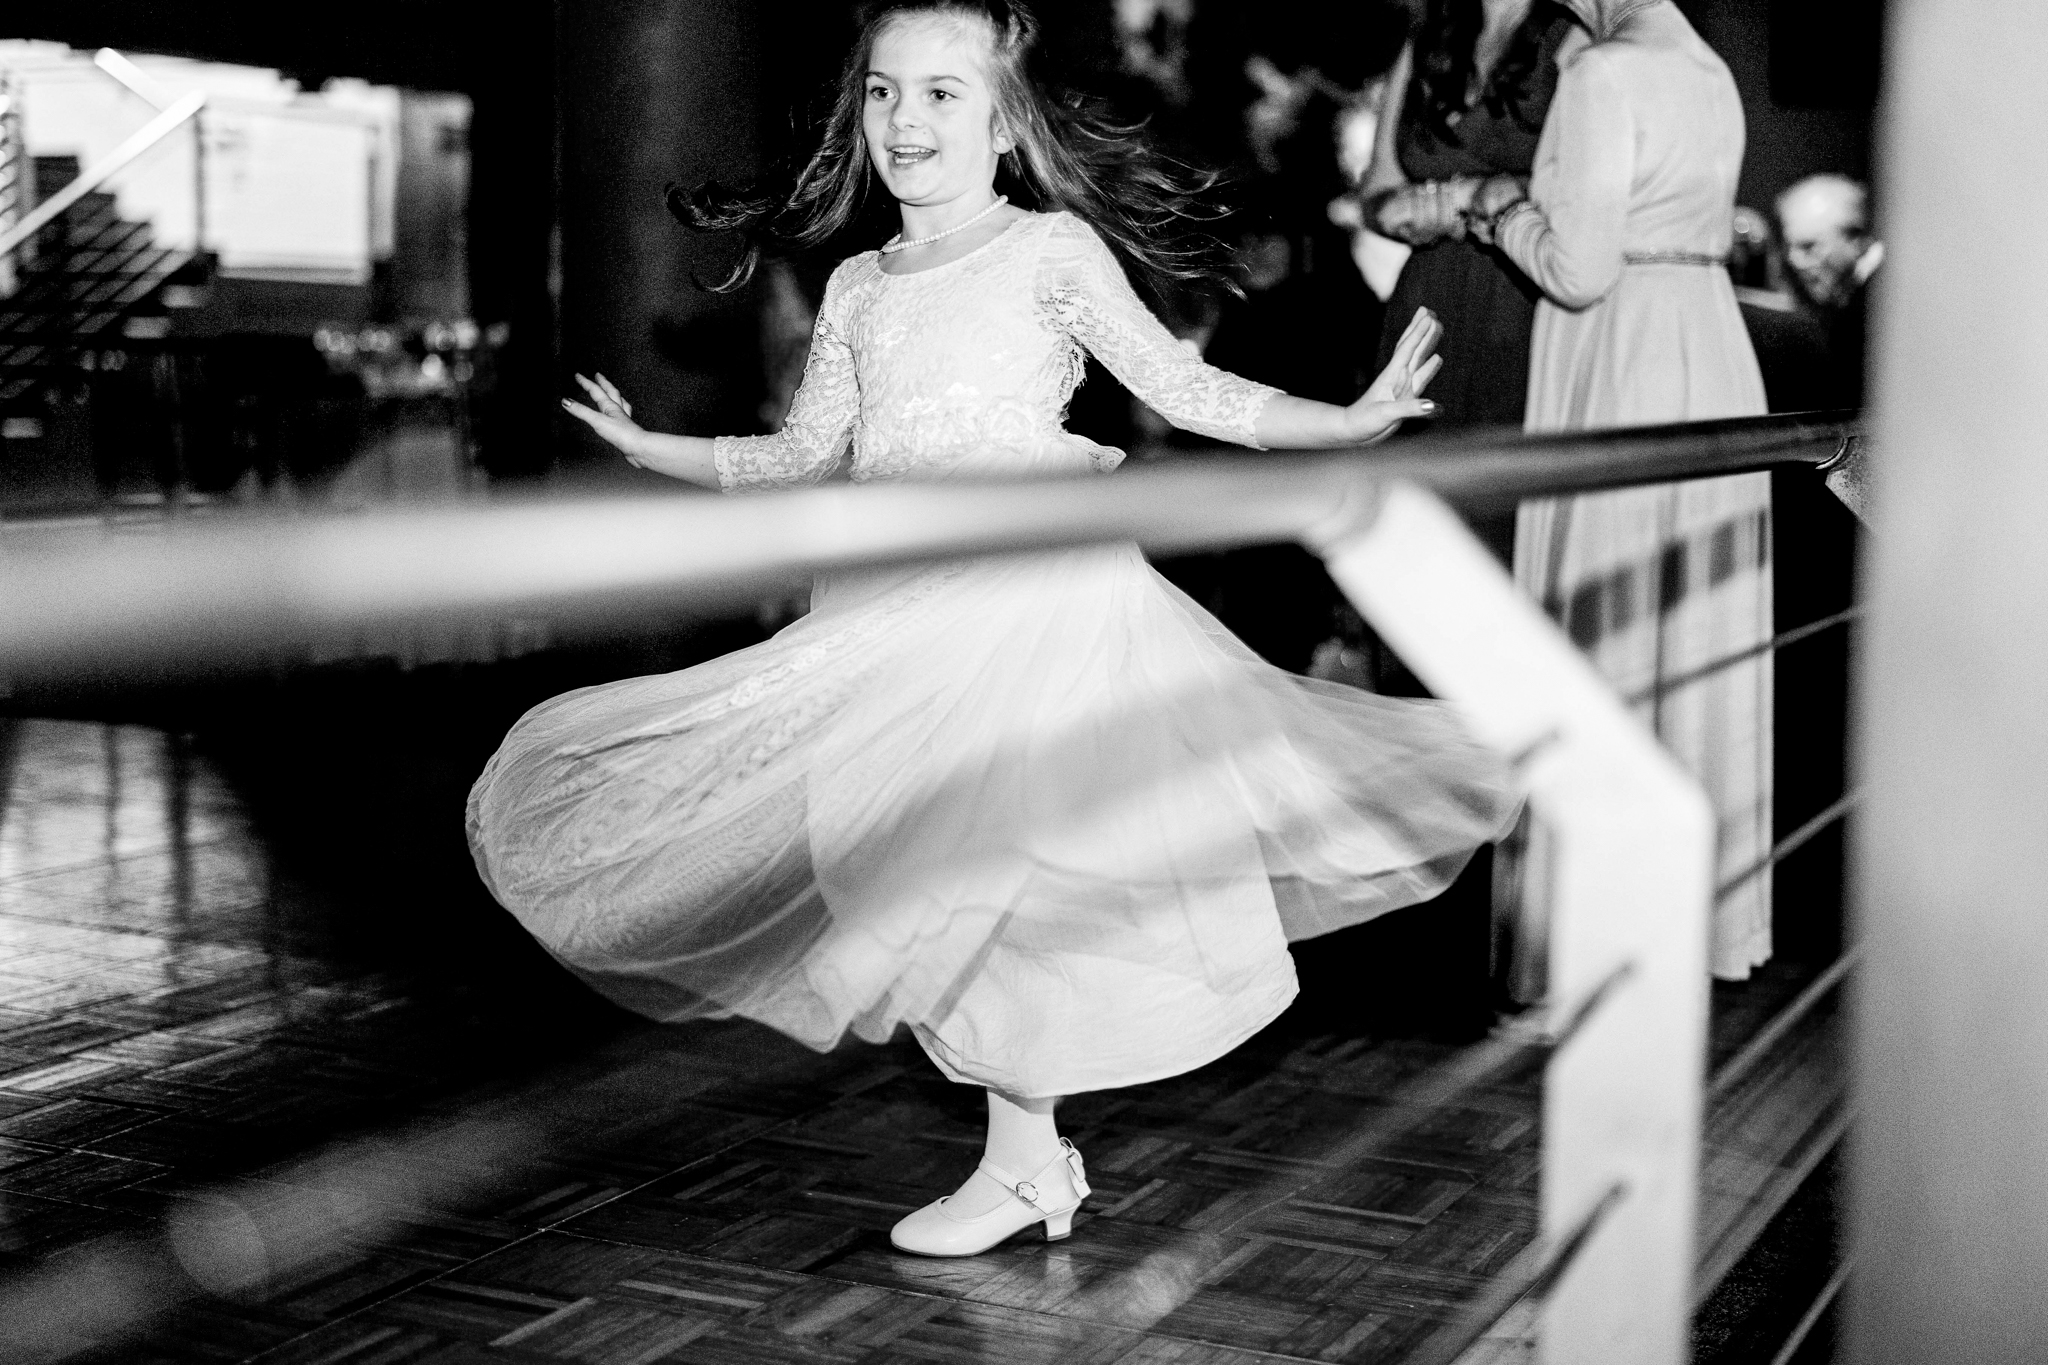 The flower girl dances at a Wedding in North Carolina.